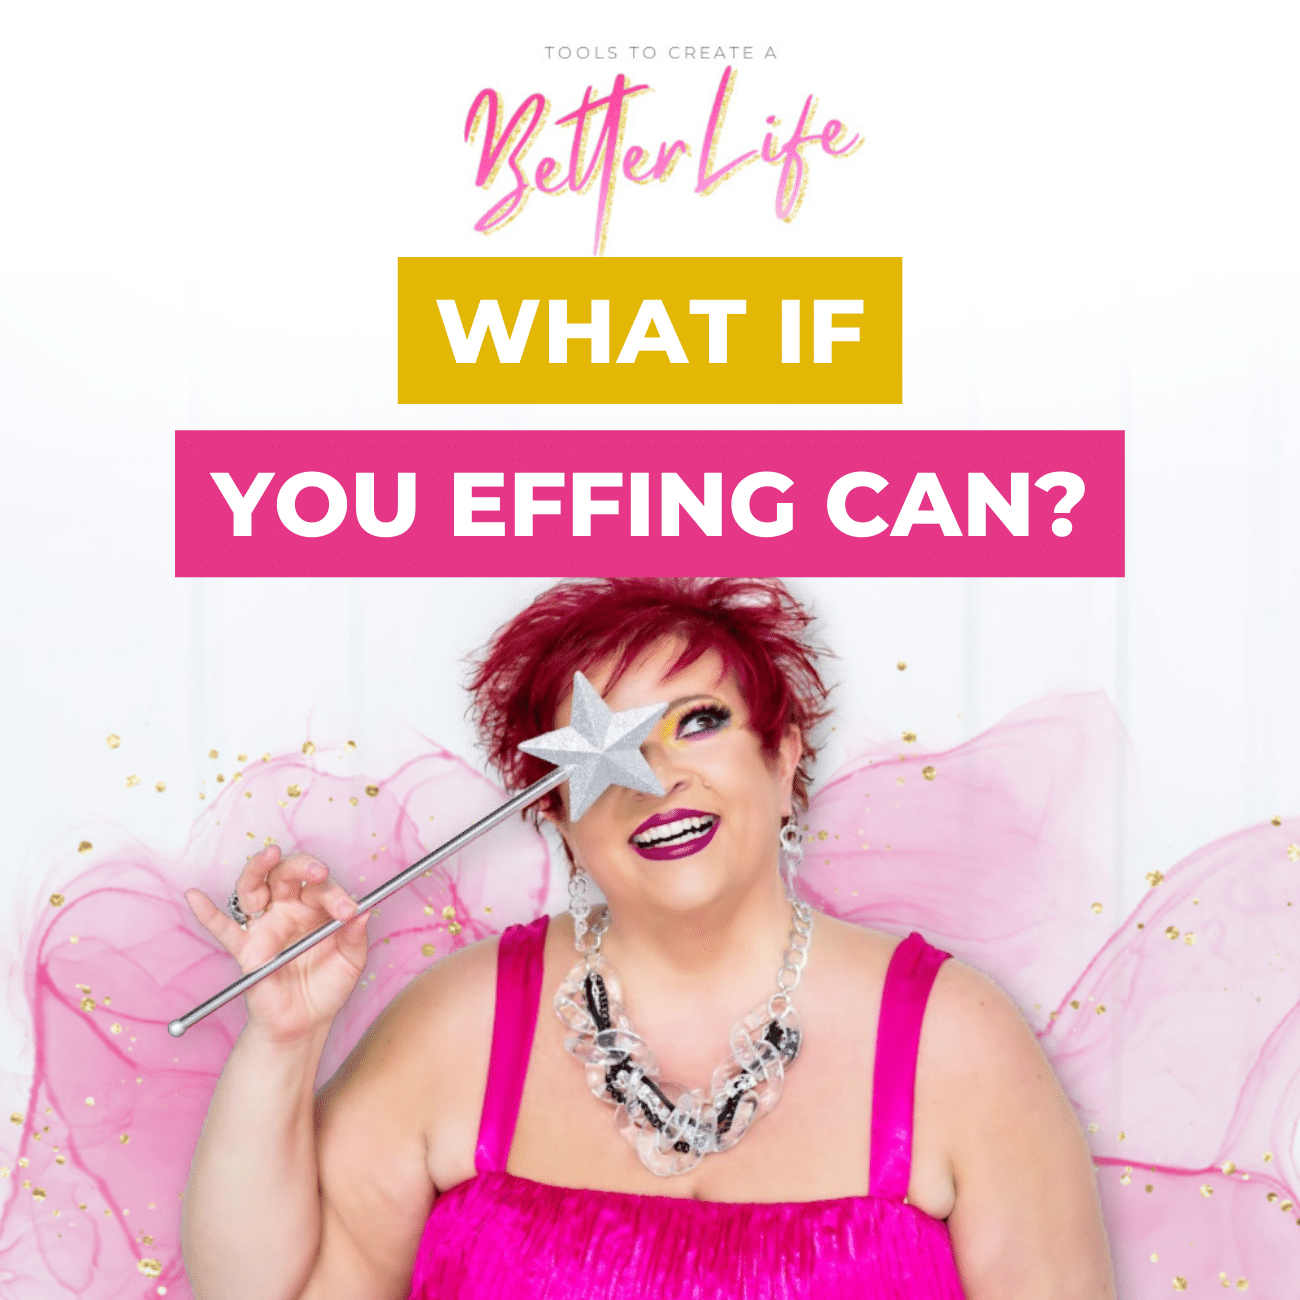 What if You Effing Can?